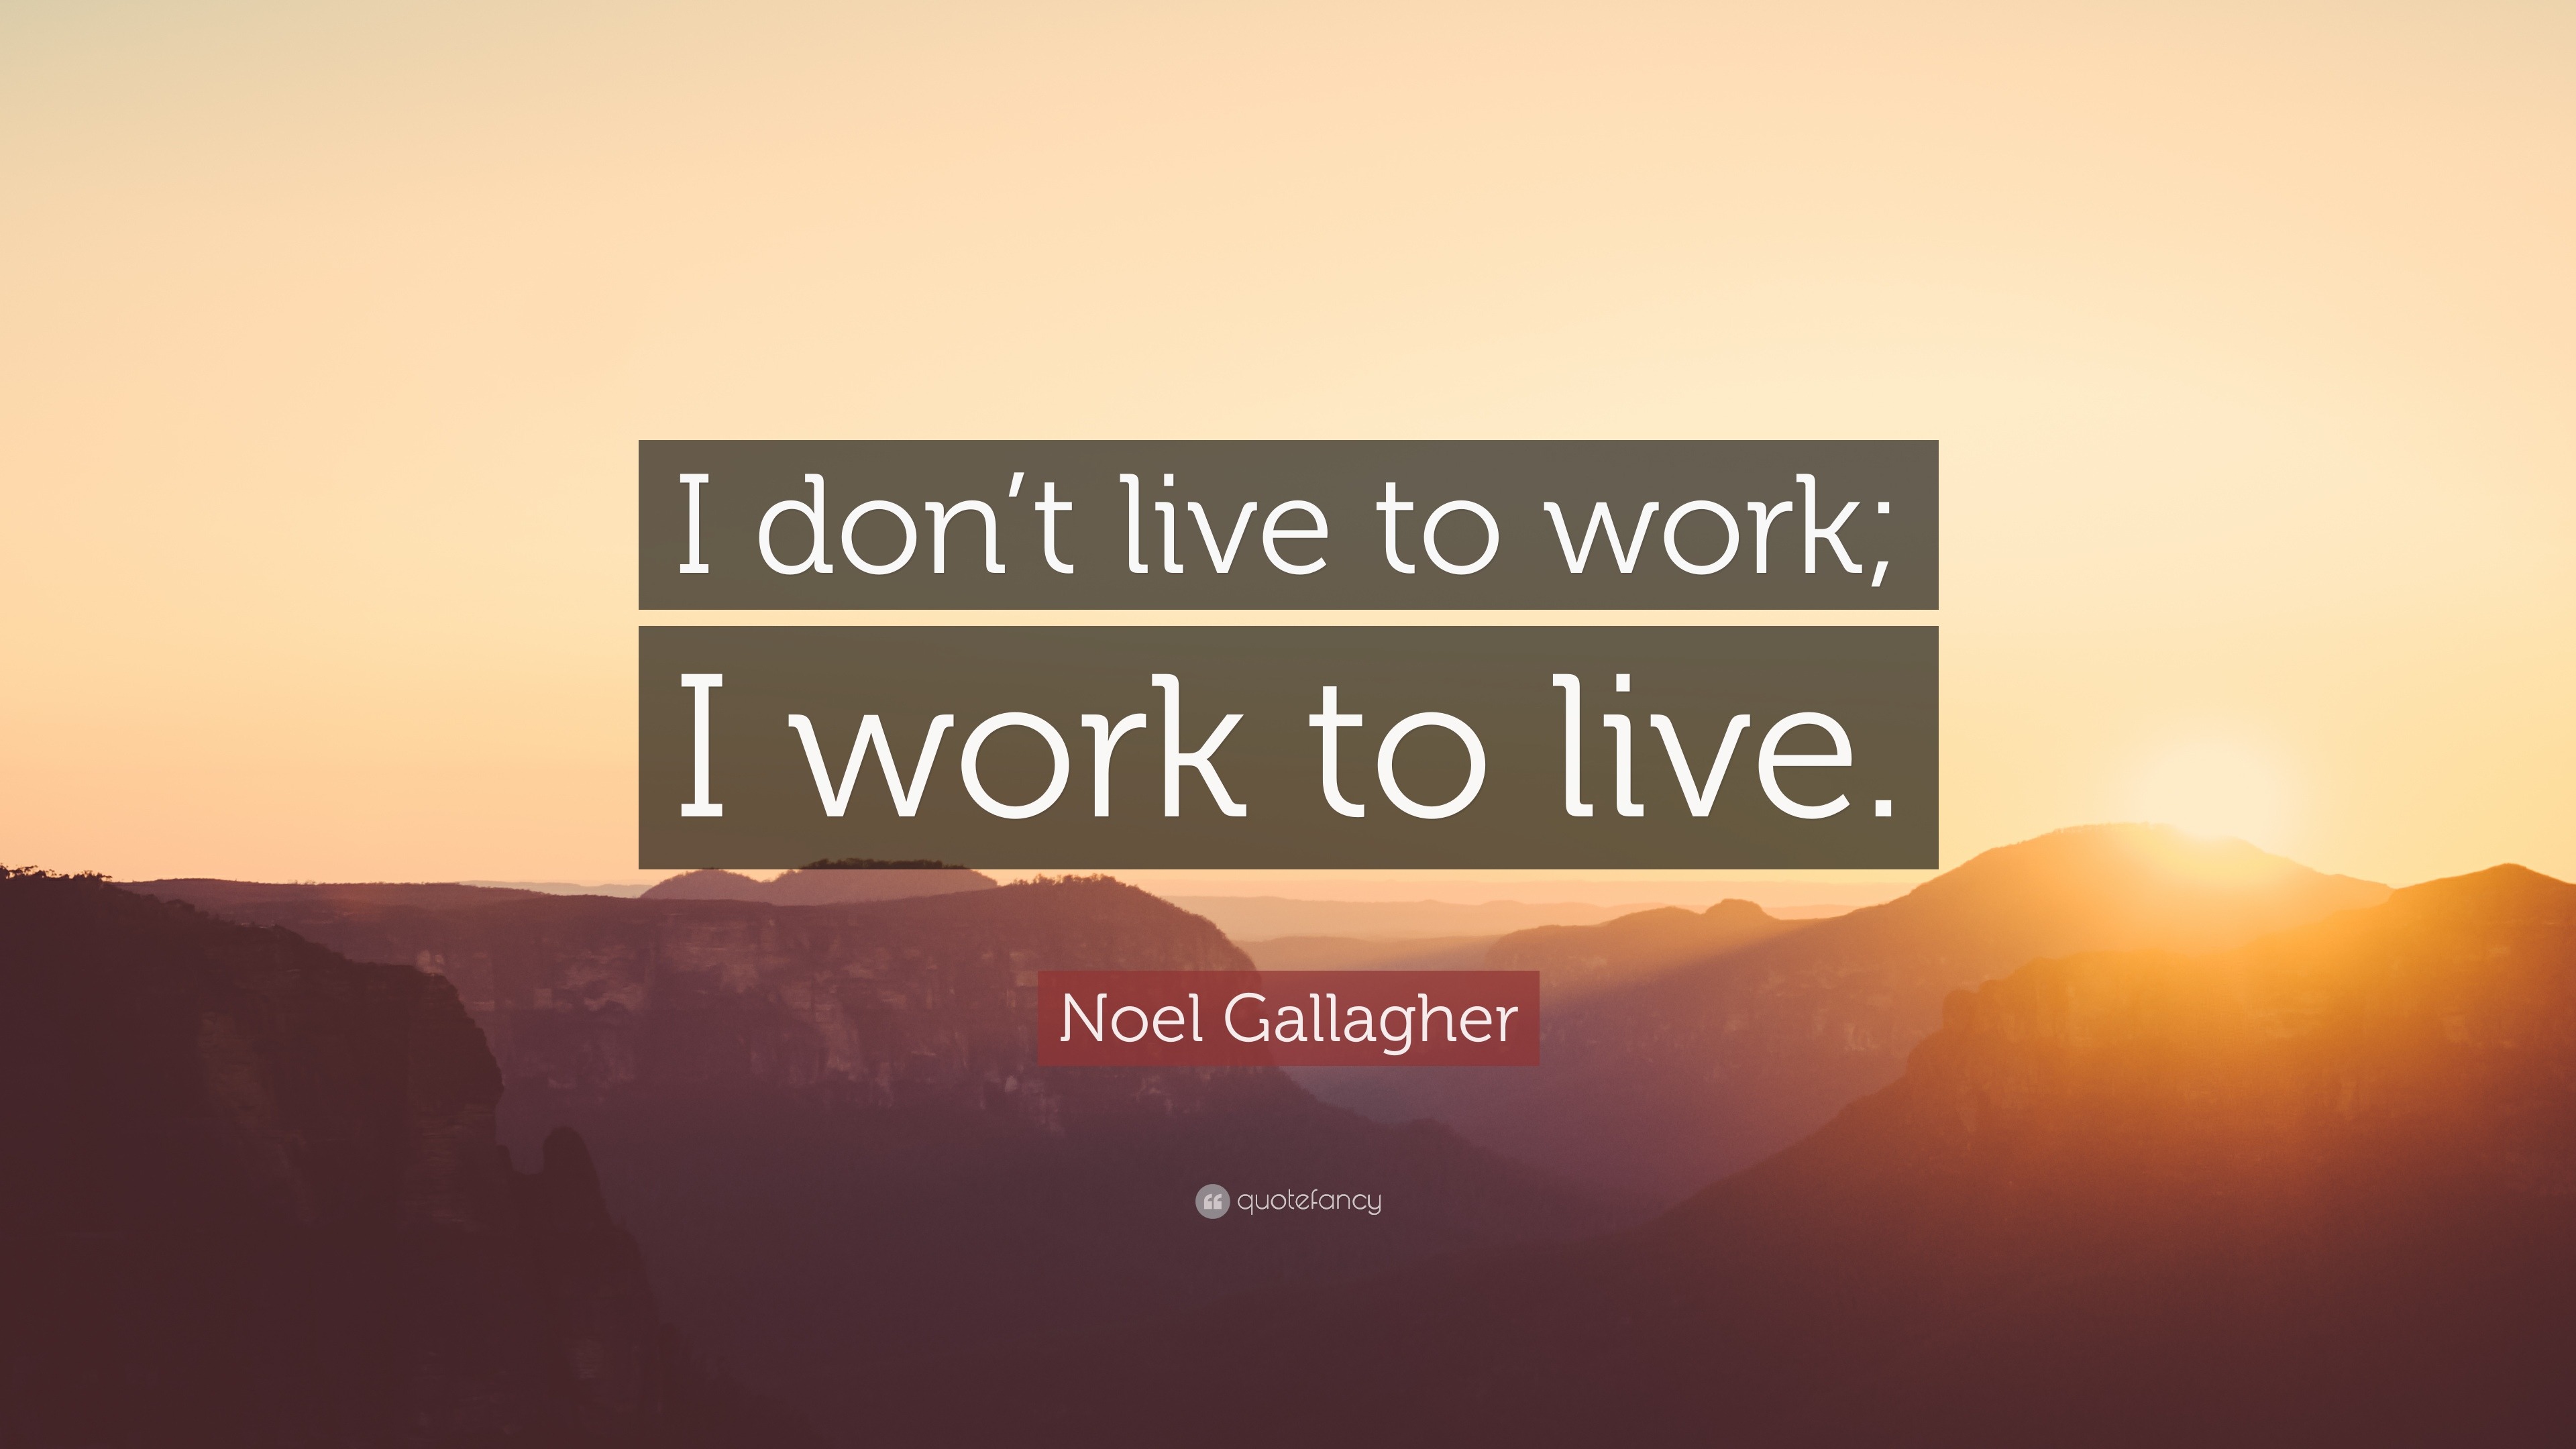 Noel Gallagher Quote: “I don’t live to work; I work to live.”